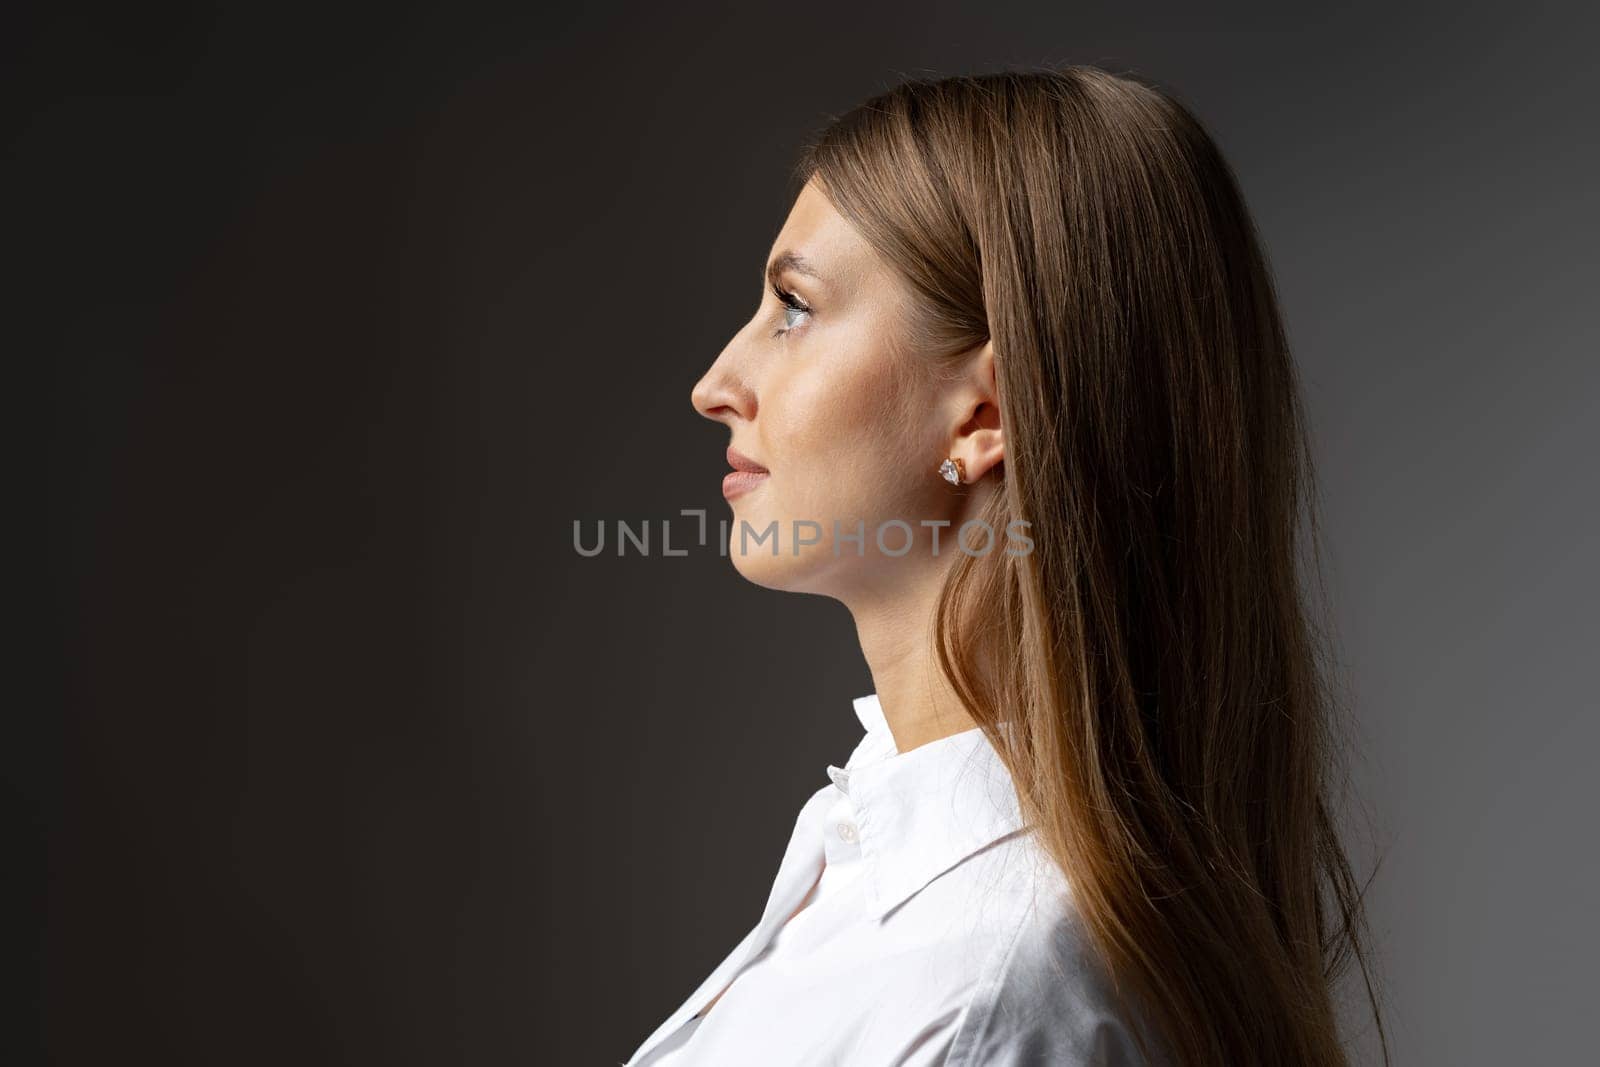 Thoughtful businesswoman portrait on a dark gray background close up